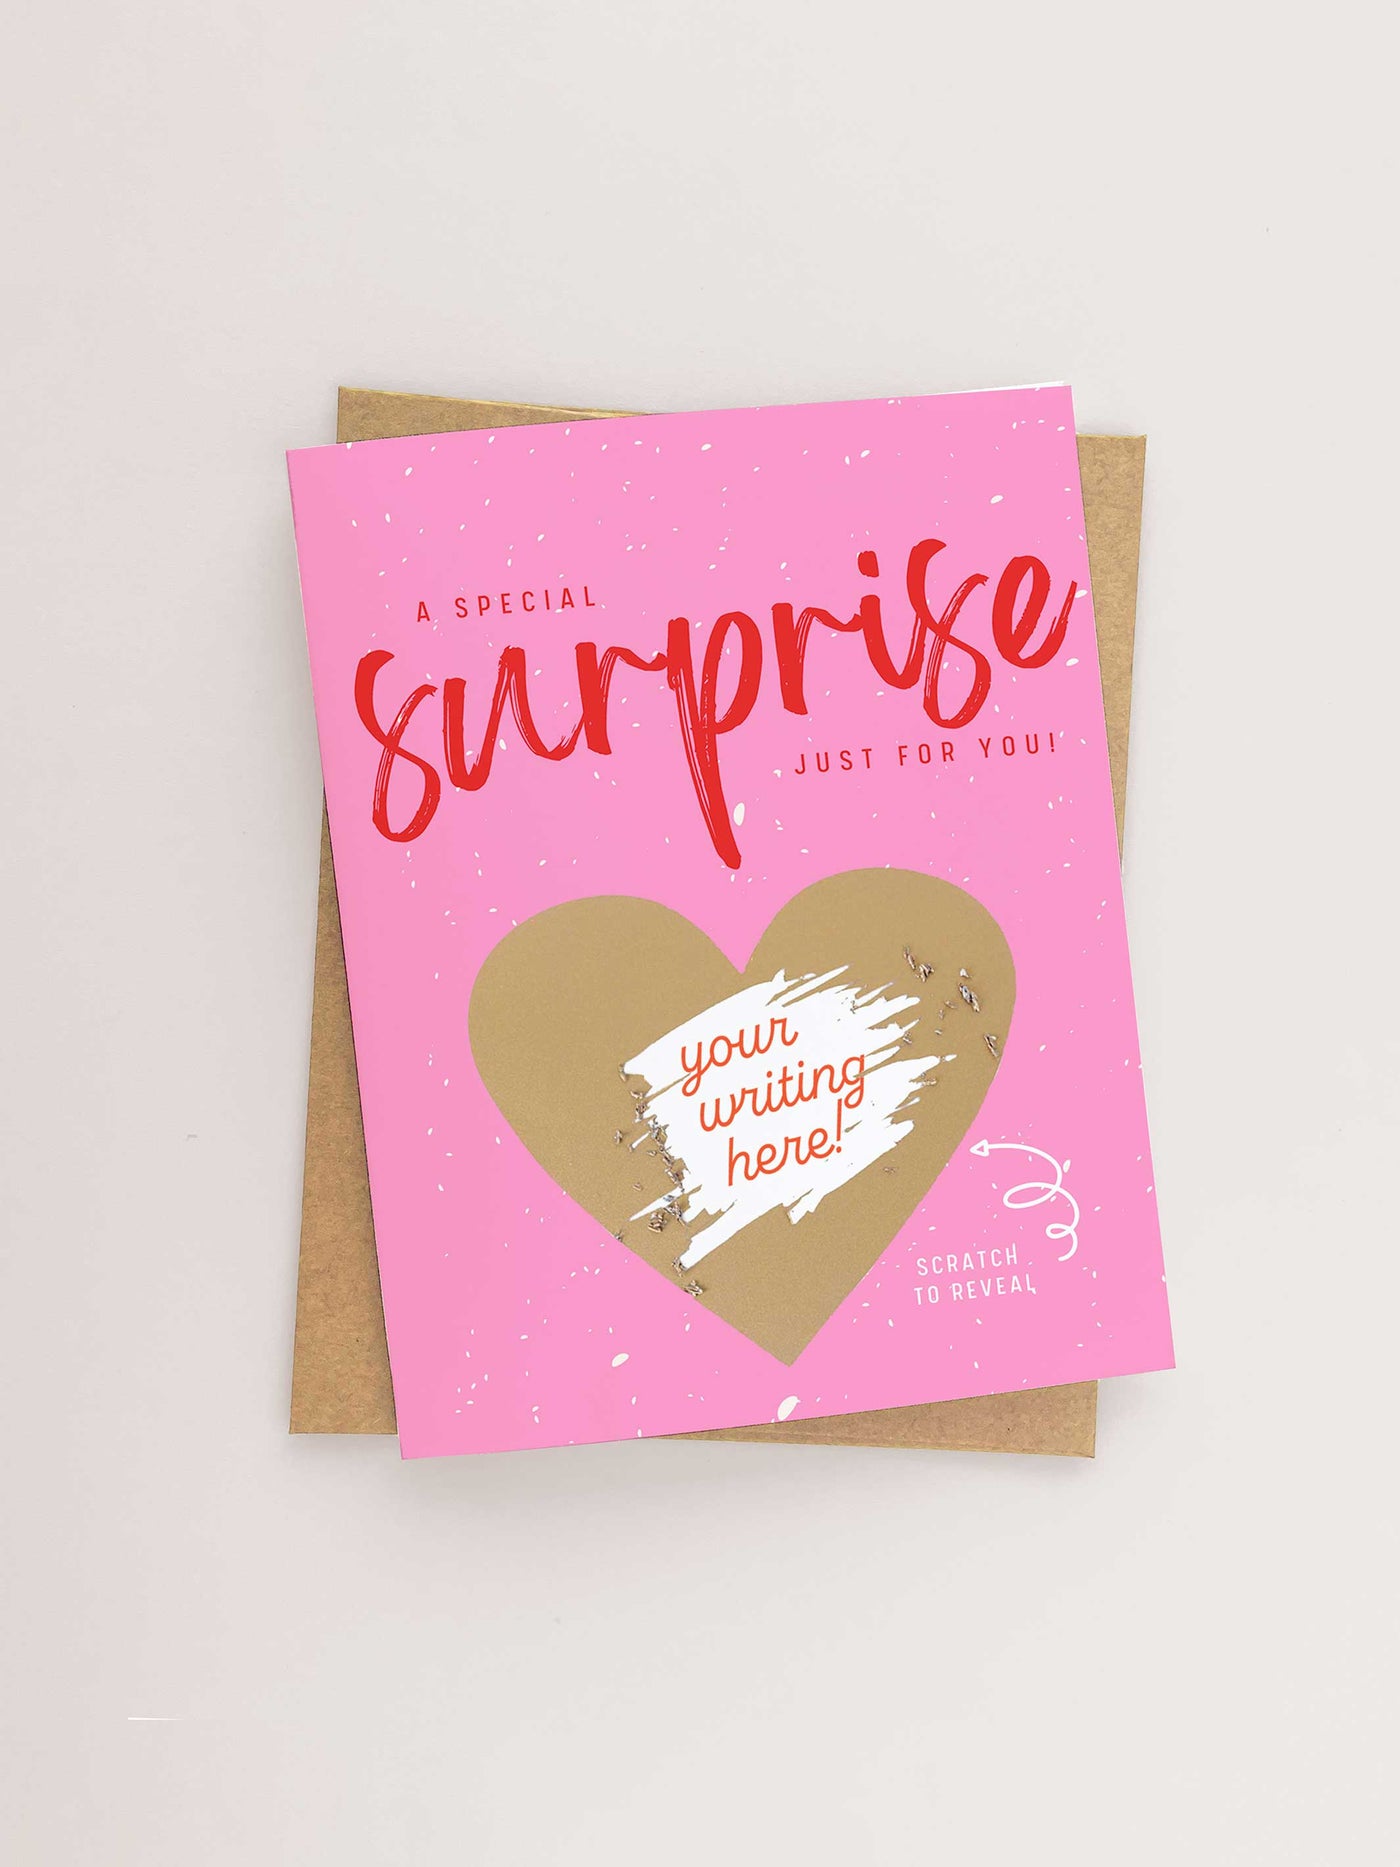 Scratch to reveal card. Bright Pink Card with a Gold Scratch off heart. Message a special surprise just for you